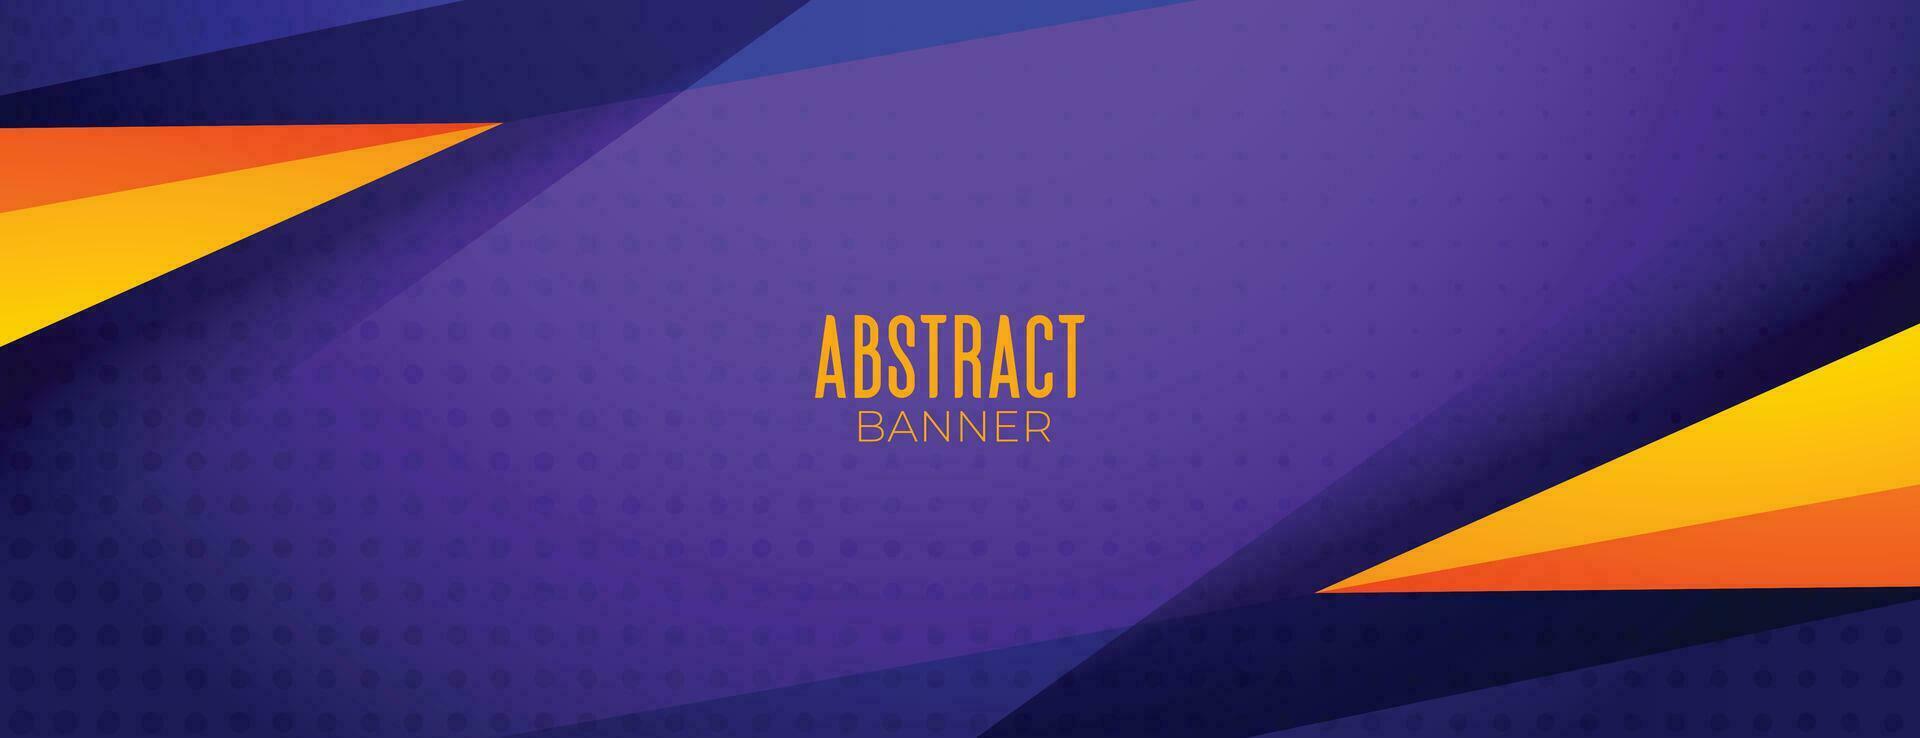 purple abstract banner in sport style design vector